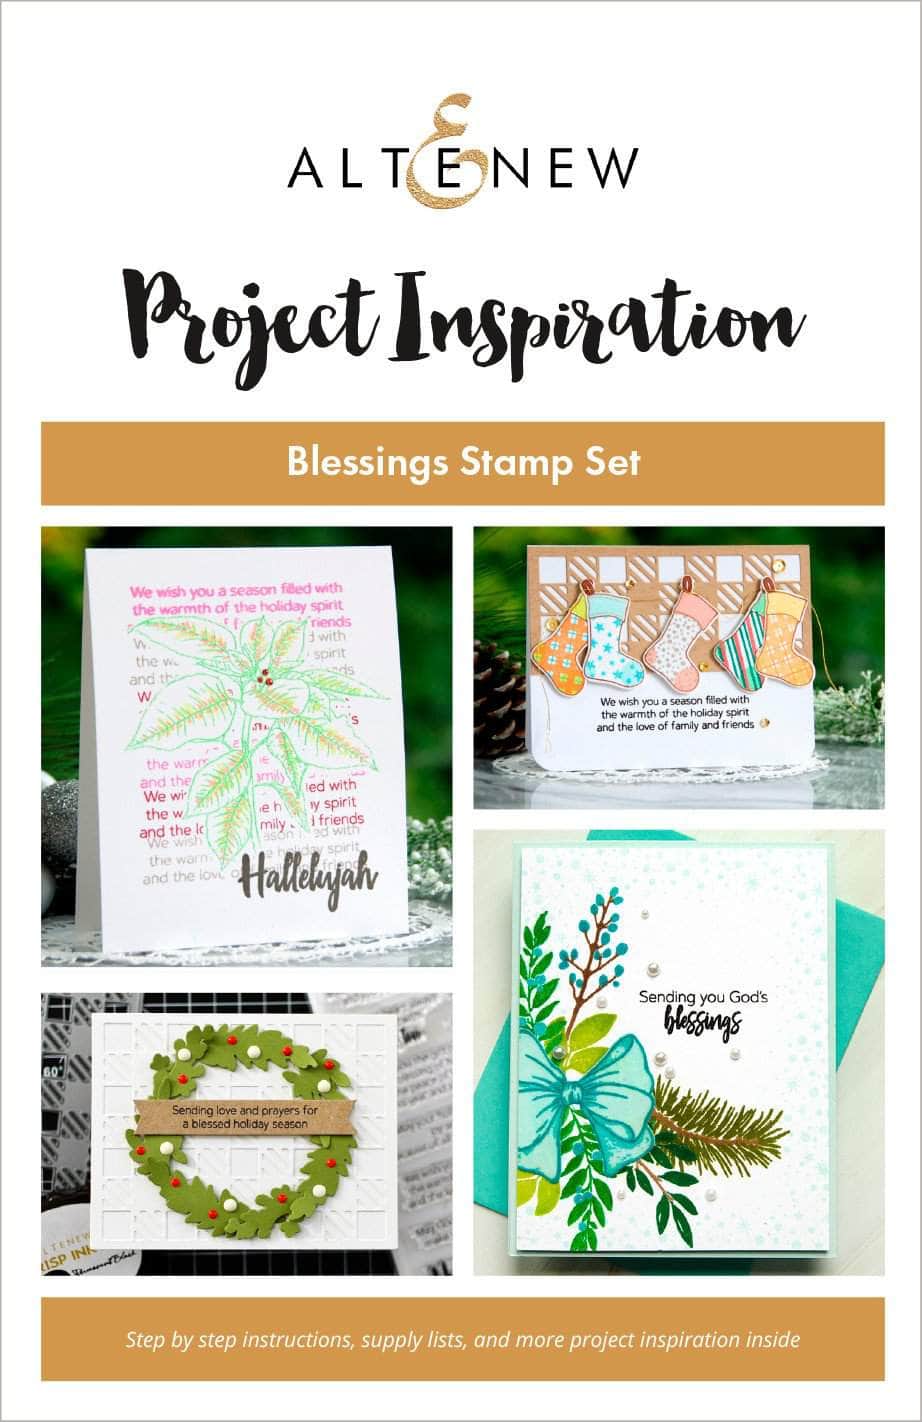 Printed Media Blessings Inspiration Guide